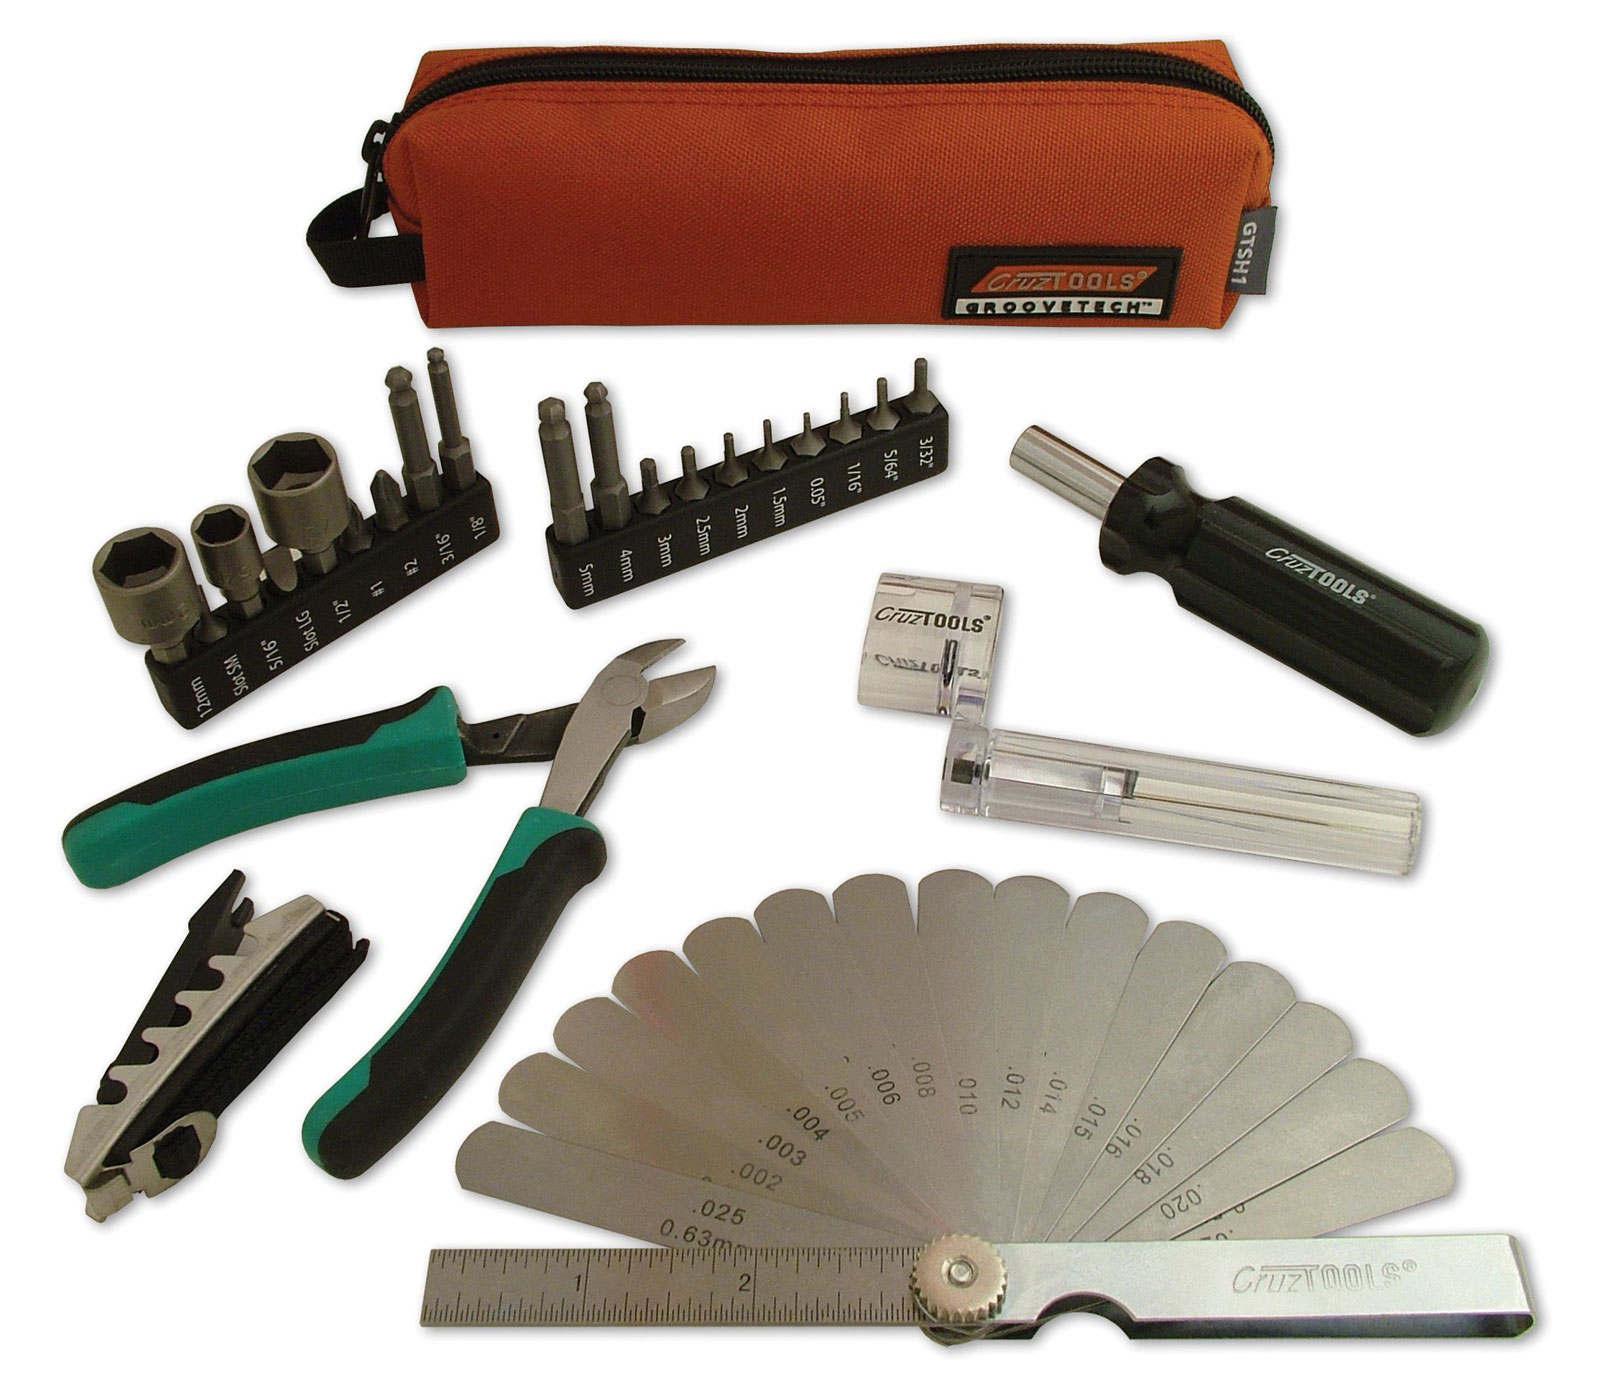 GROOVETECH CRUZ TOOLS STAGEHAND COMPACT TECH KIT